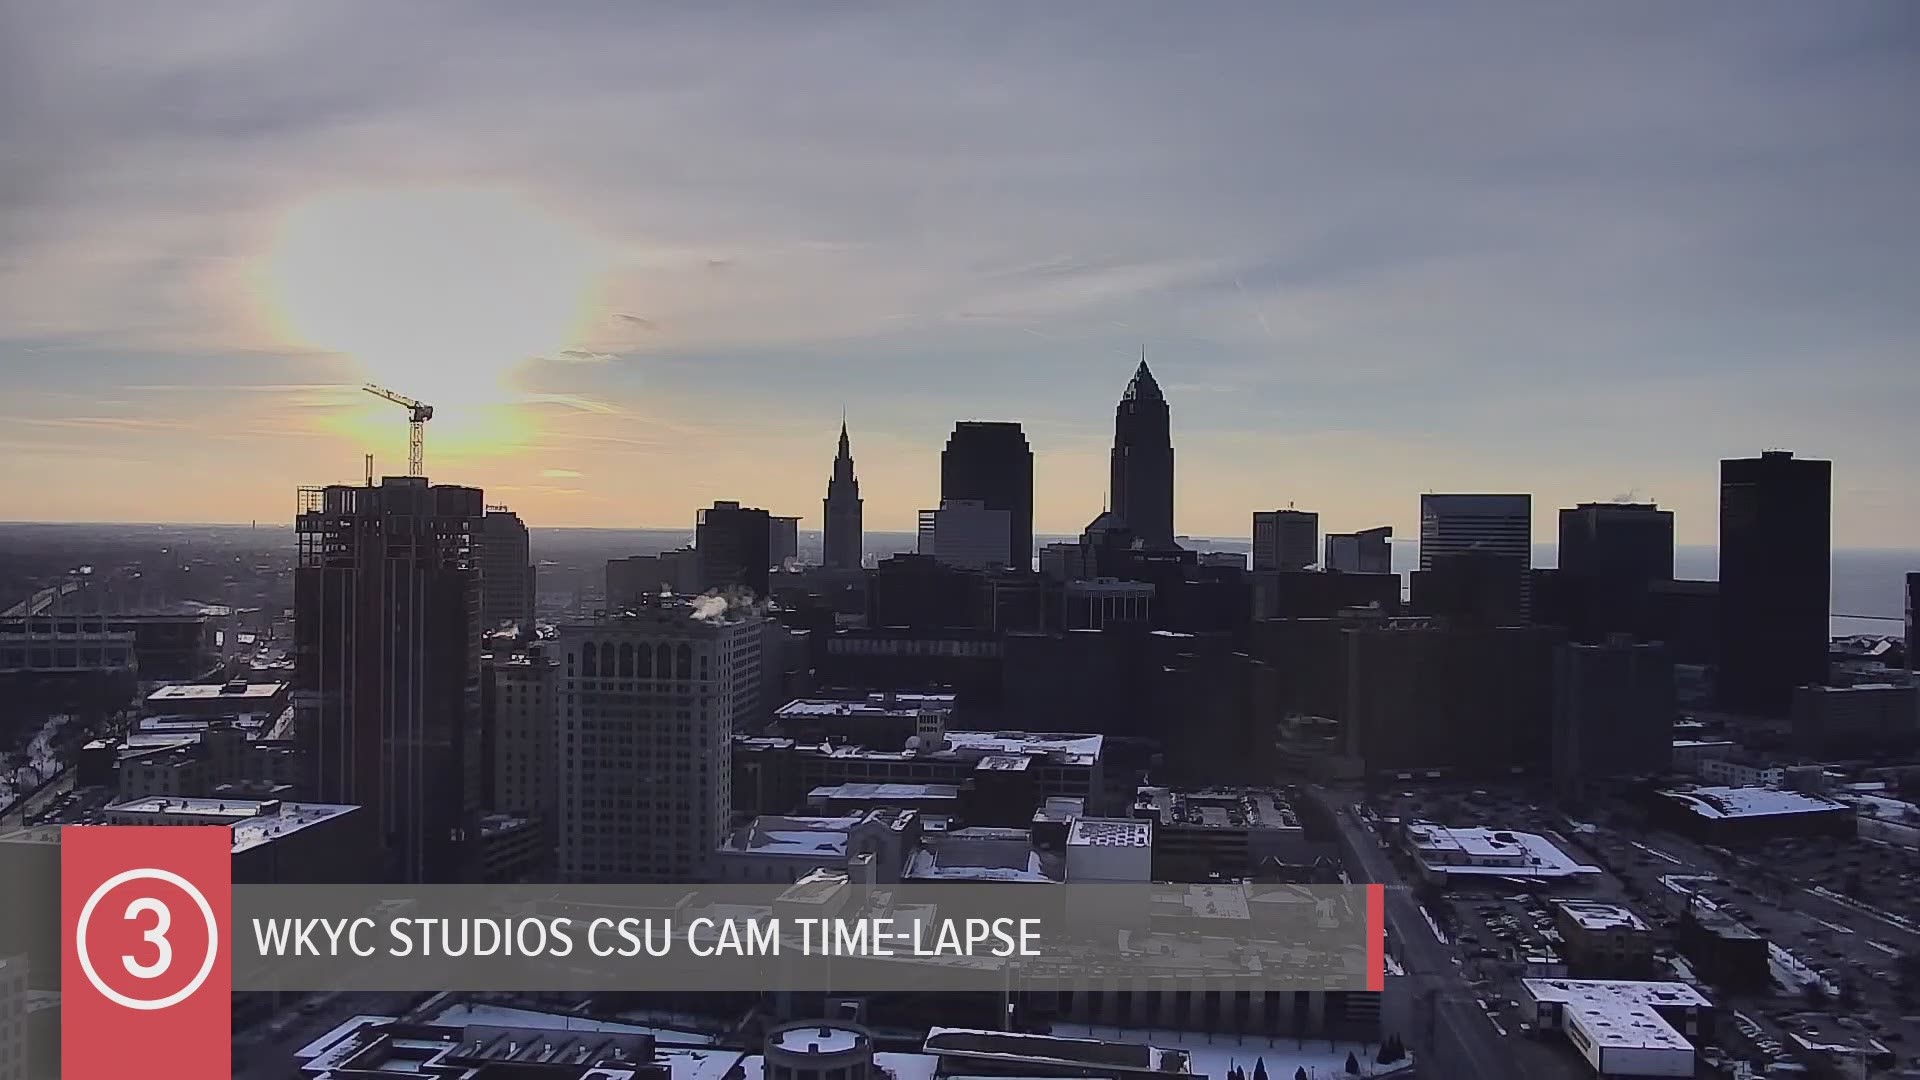 What a great looking sunset this evening from our WKYC Studios CSU cam time-lapse. #3weather